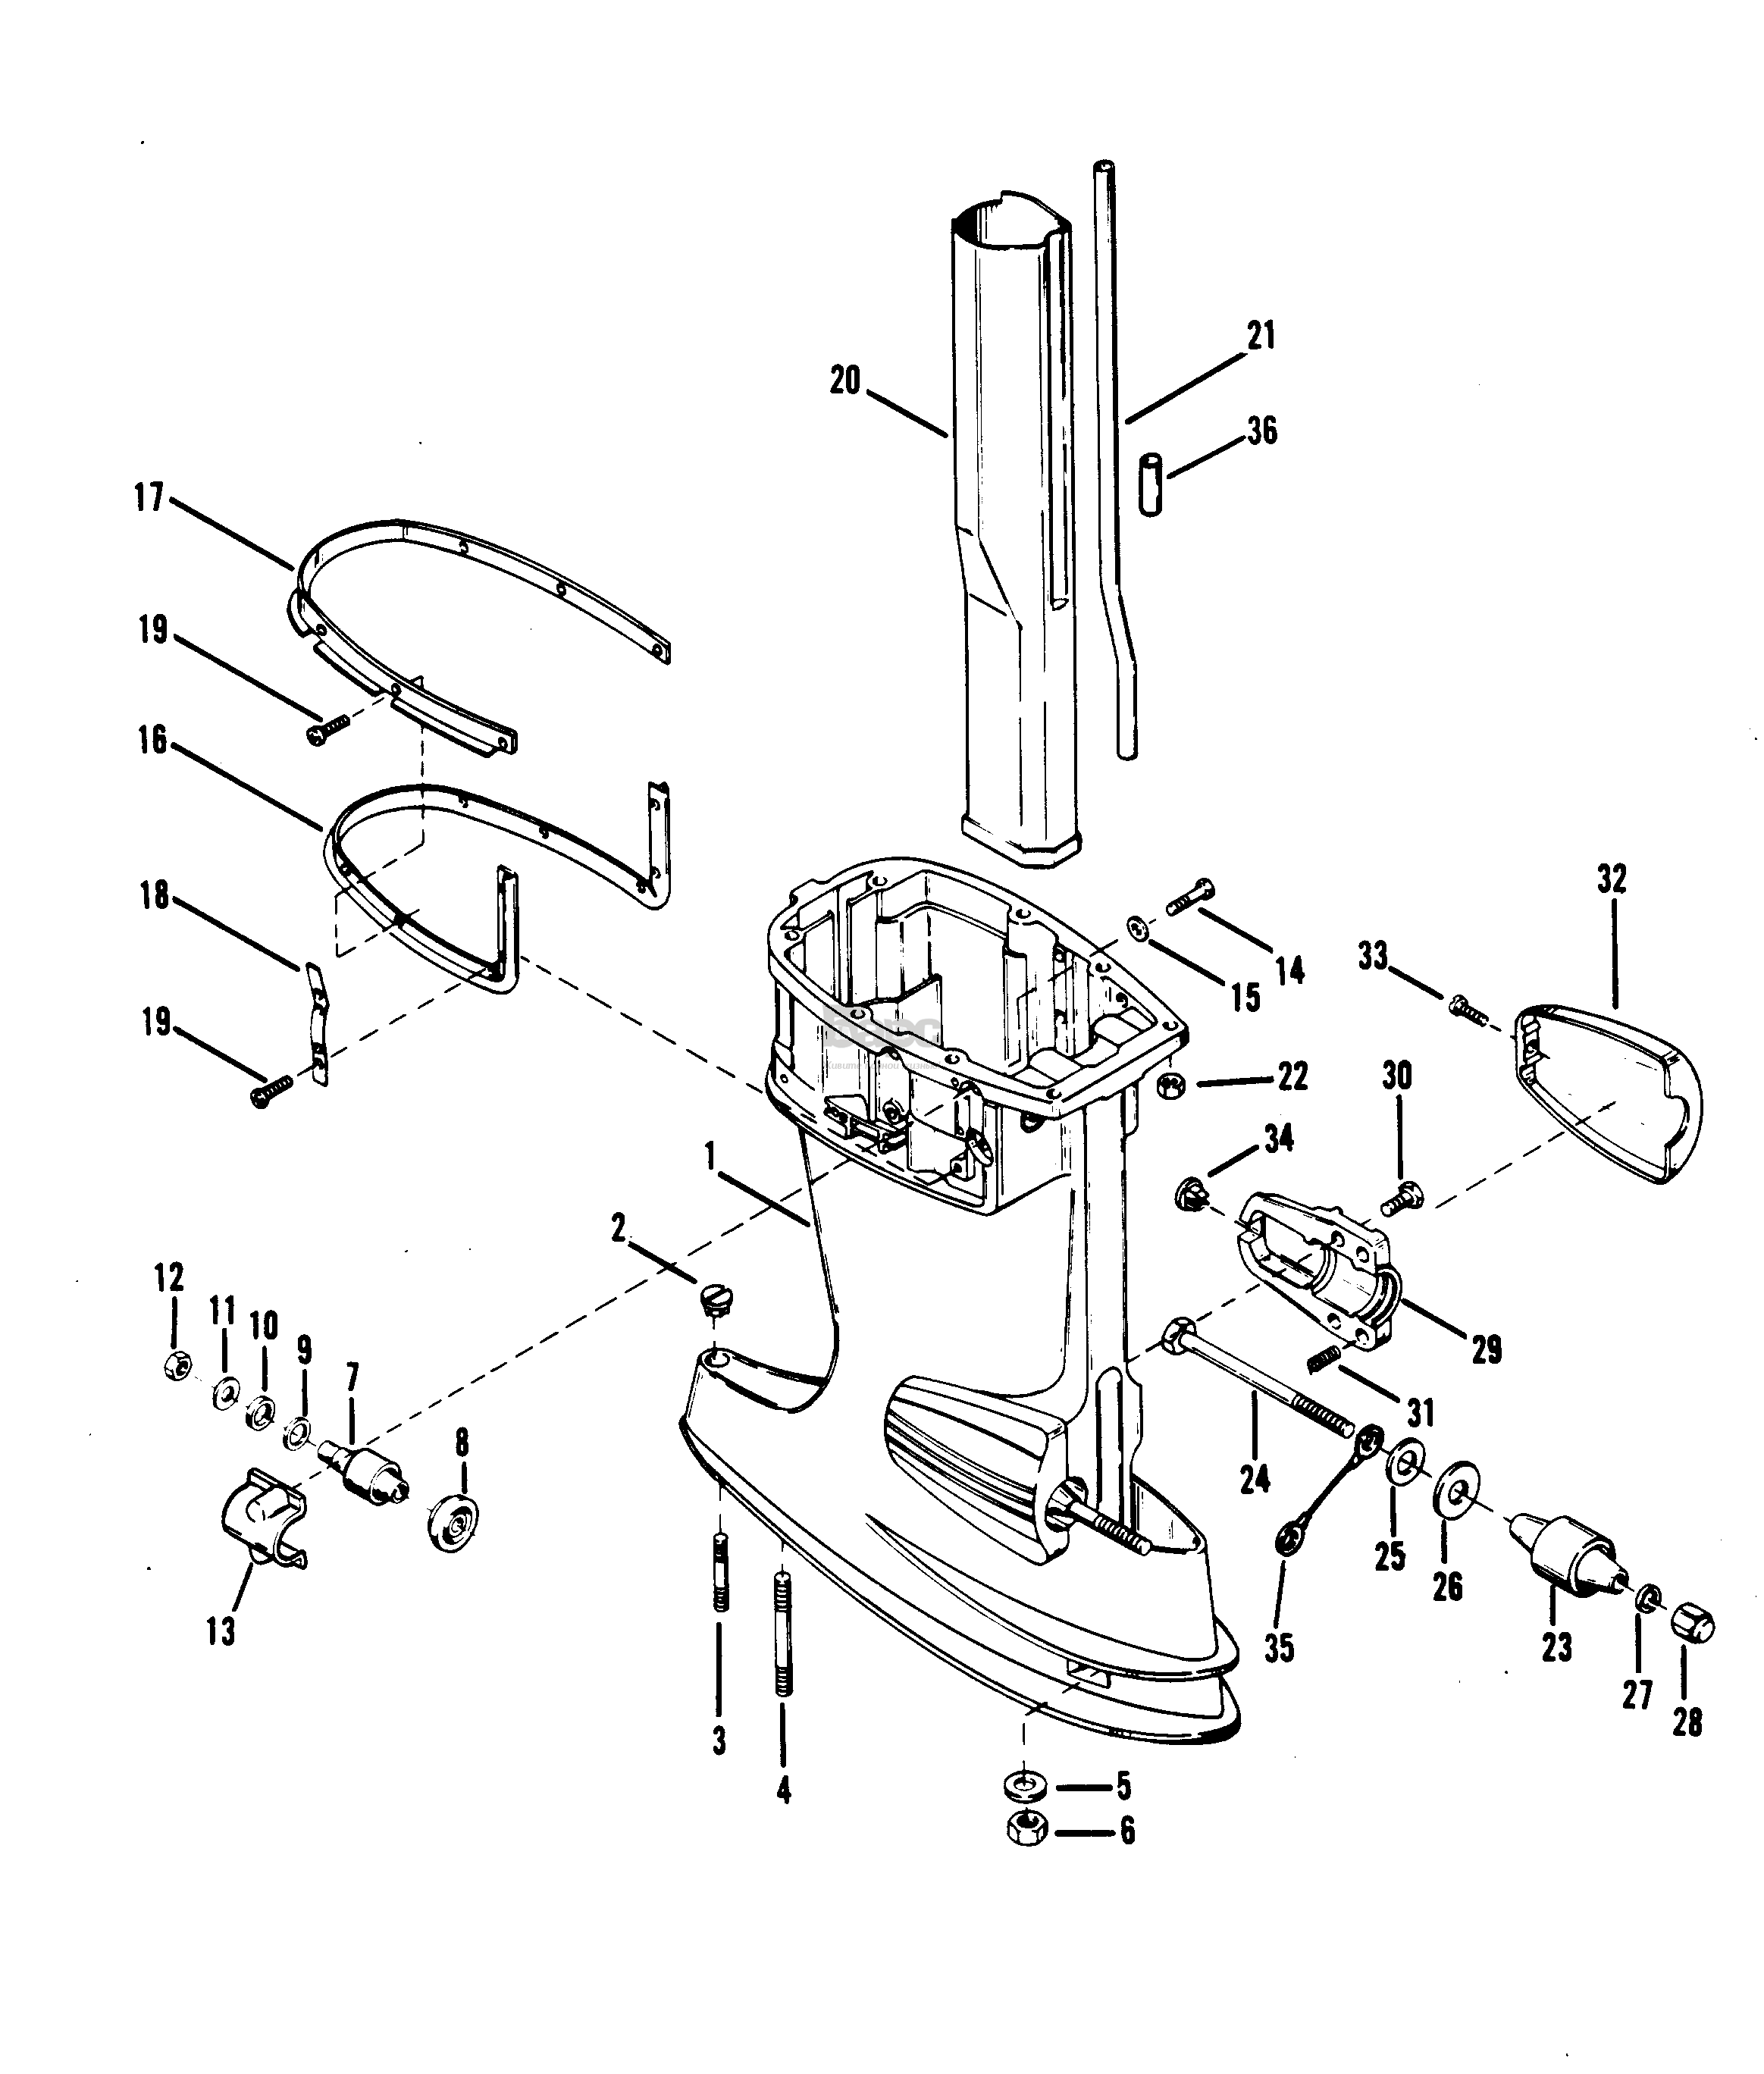 DRIVE SHAFT HOUSING ASSEMBLY